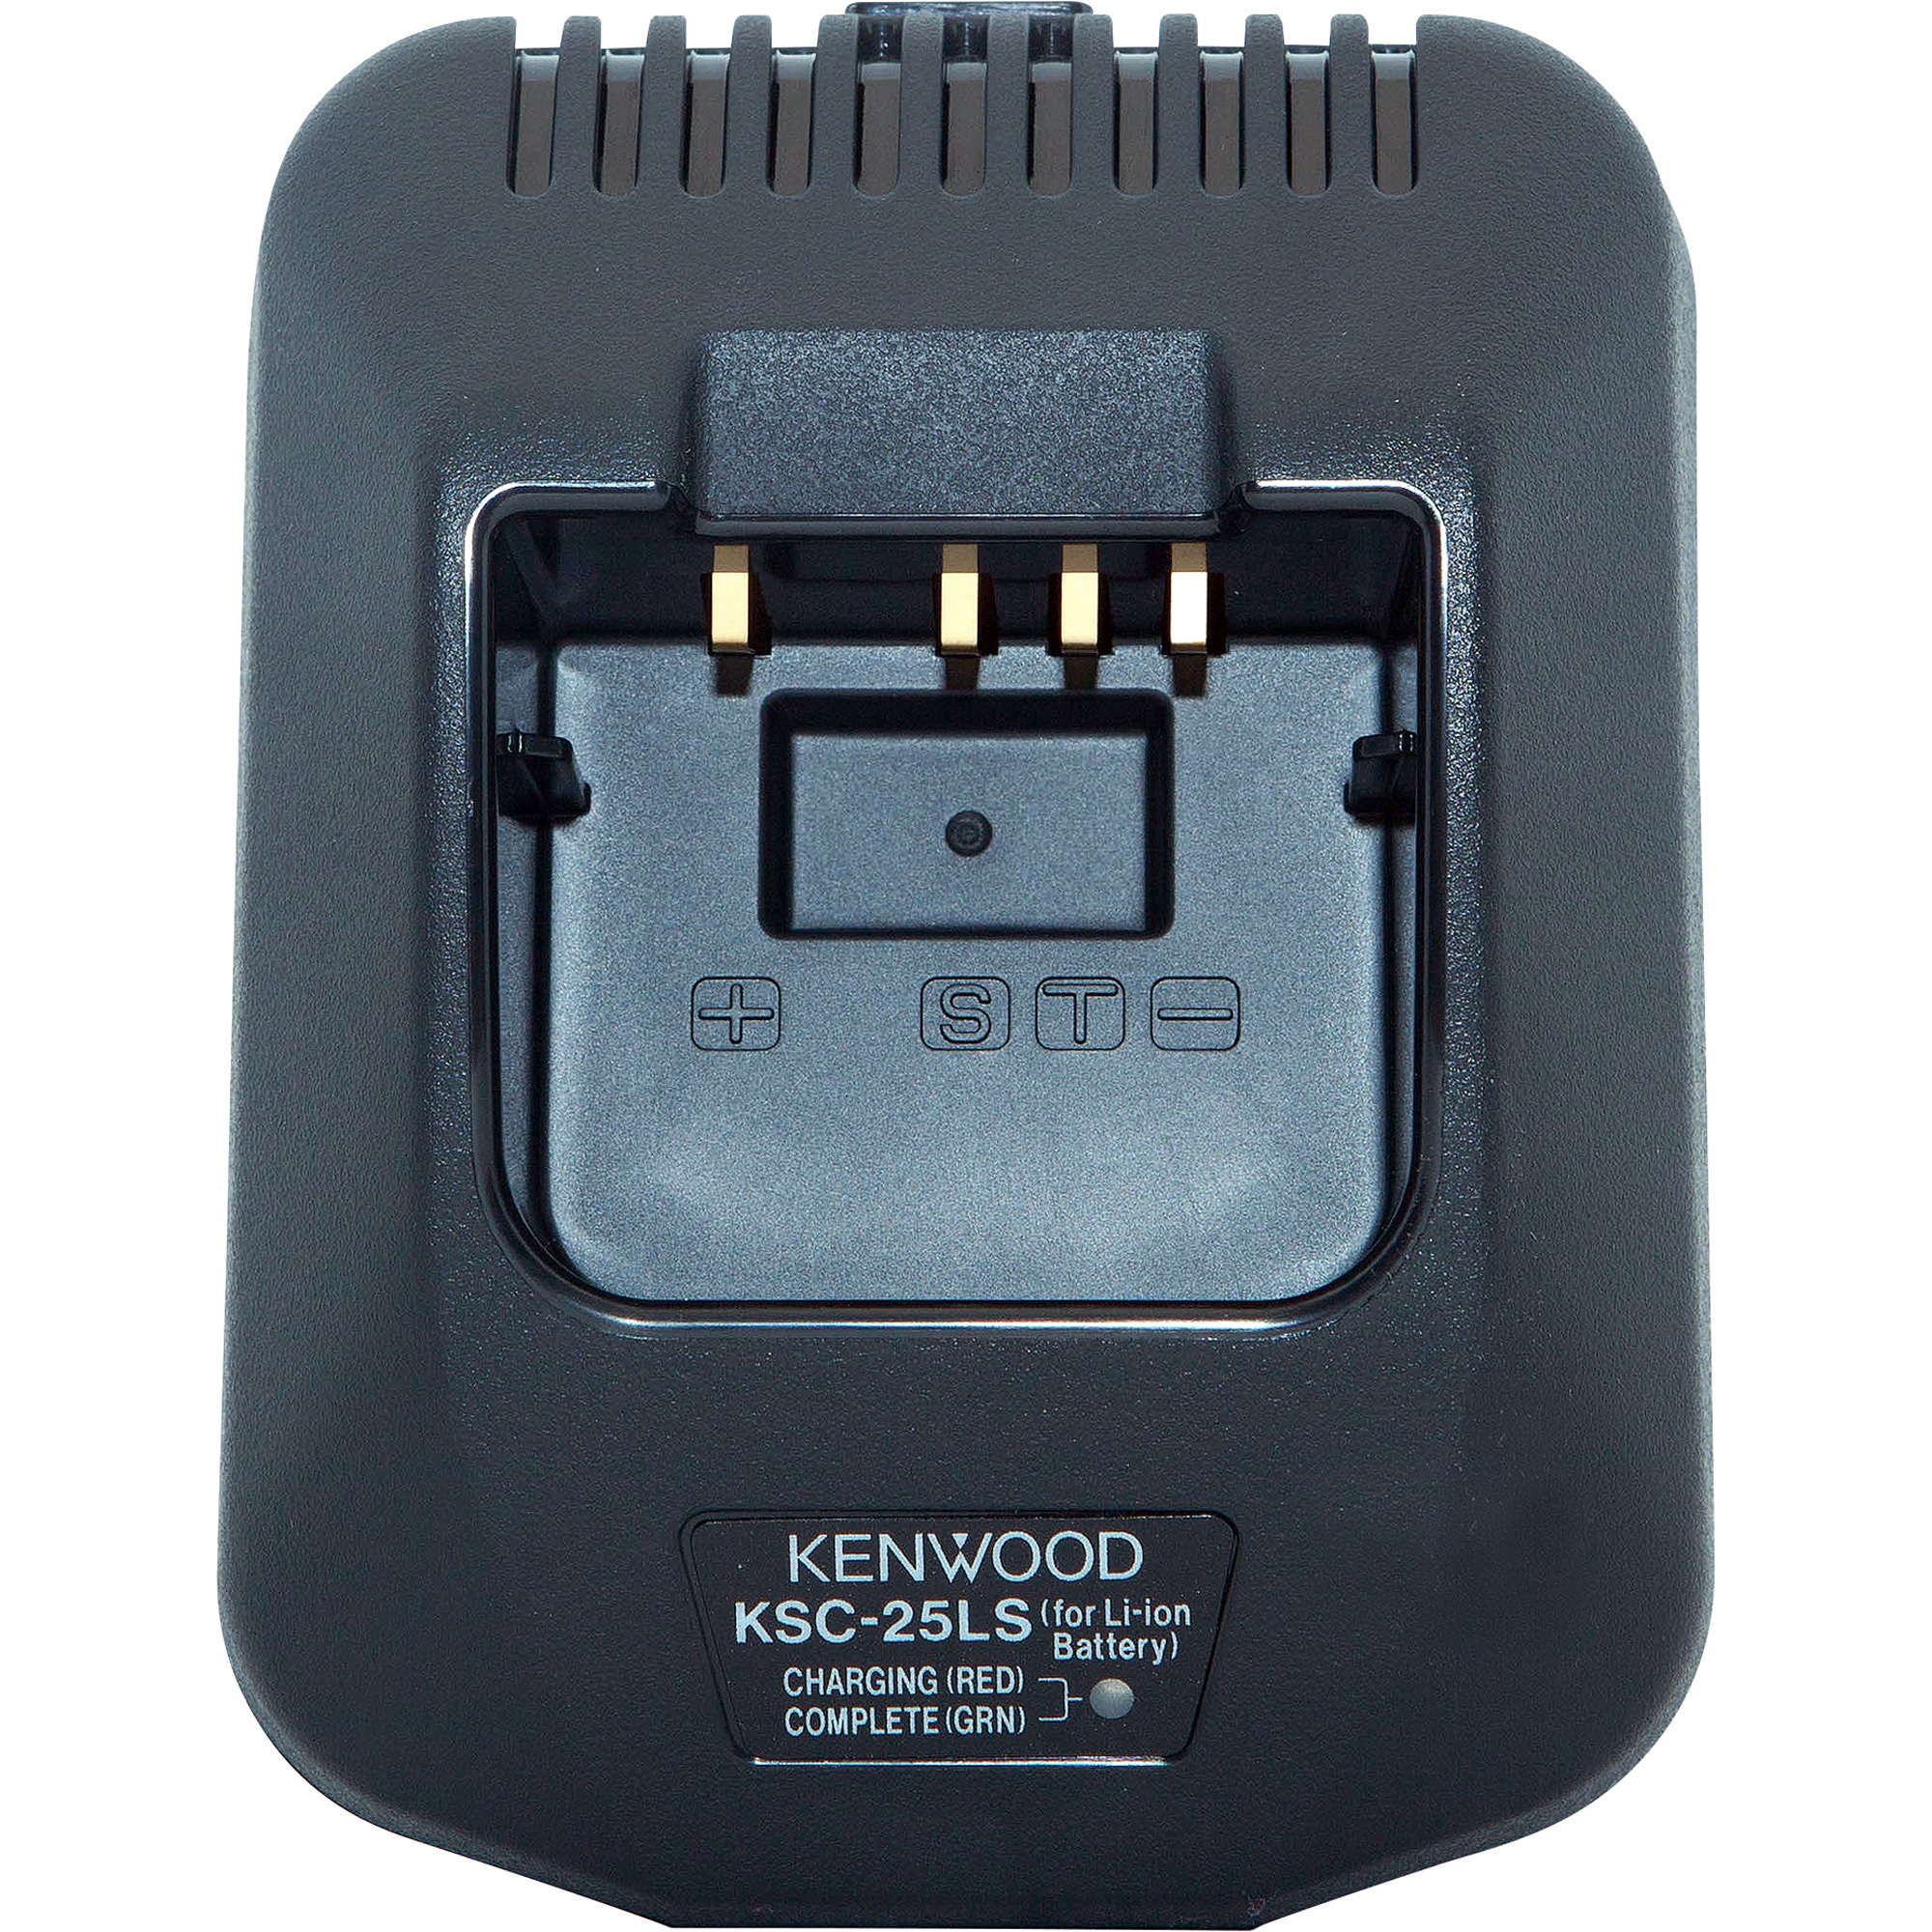 Kenwood 120 Volt Rapid Charger for TK-2360/3360IS 2-Way Radios â Model KSC-25LSK